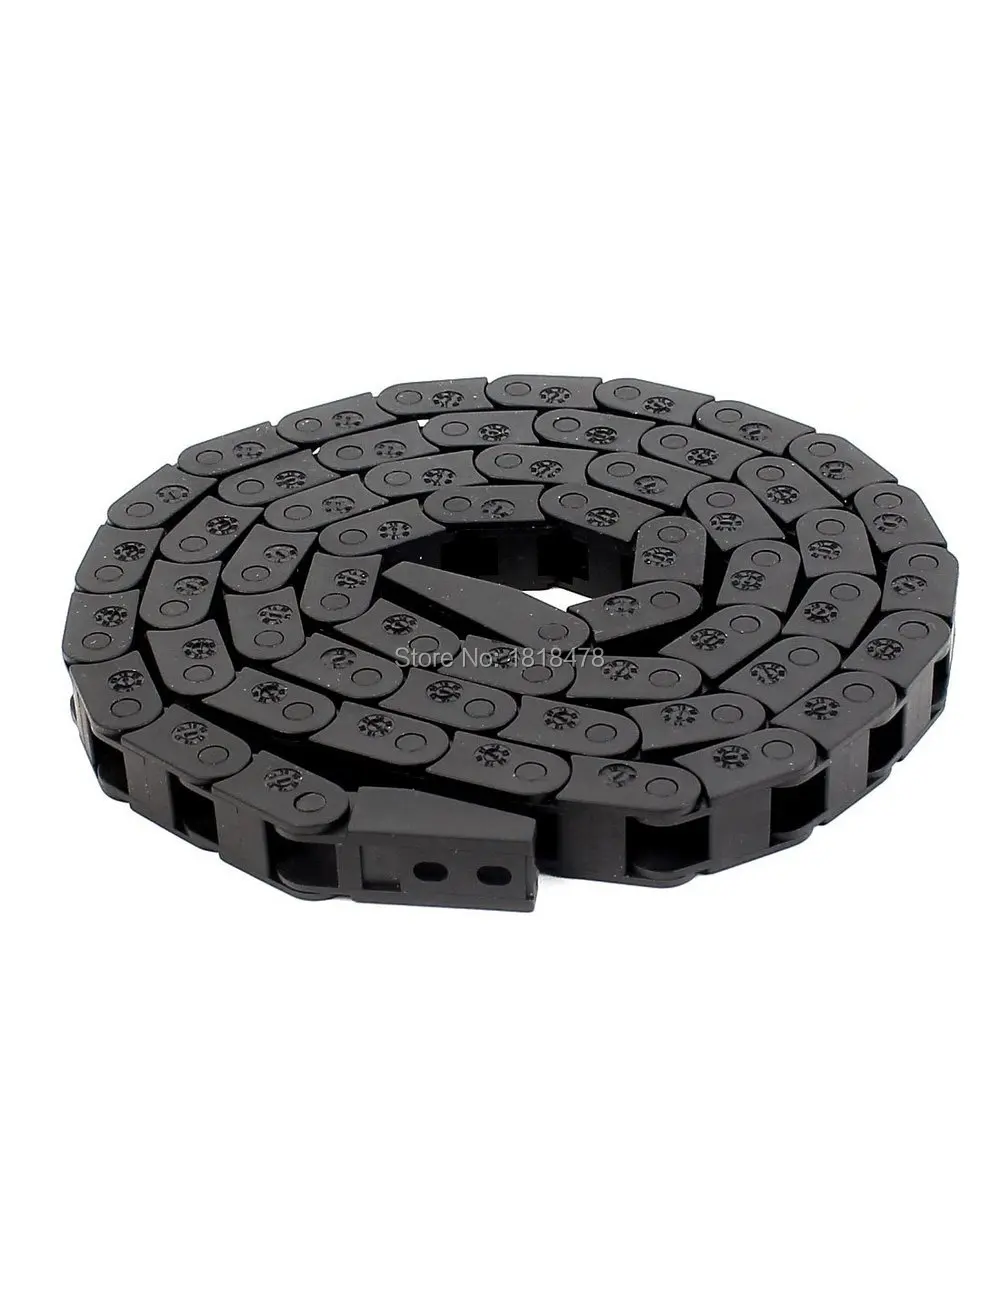 

Black Plastic Cable Drag Chain Wire Carrier R15 7x7mm 1M 3Ft Long